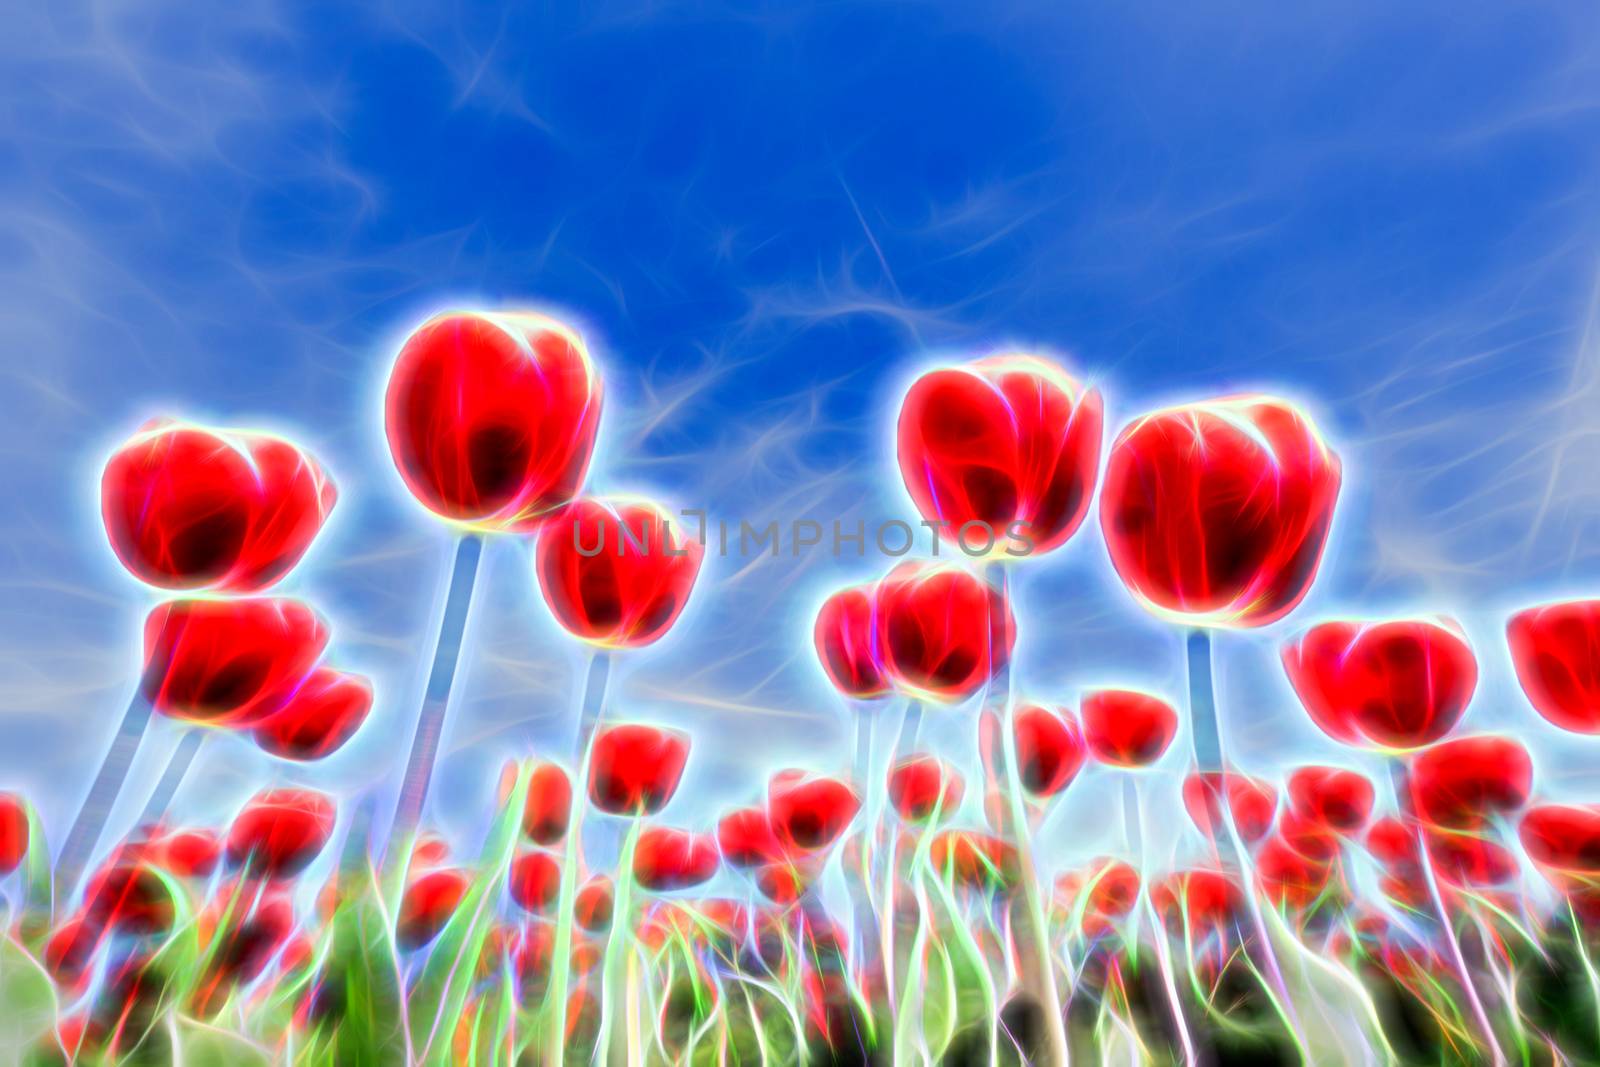 Special lightning effects in group of red tulips with blue sky